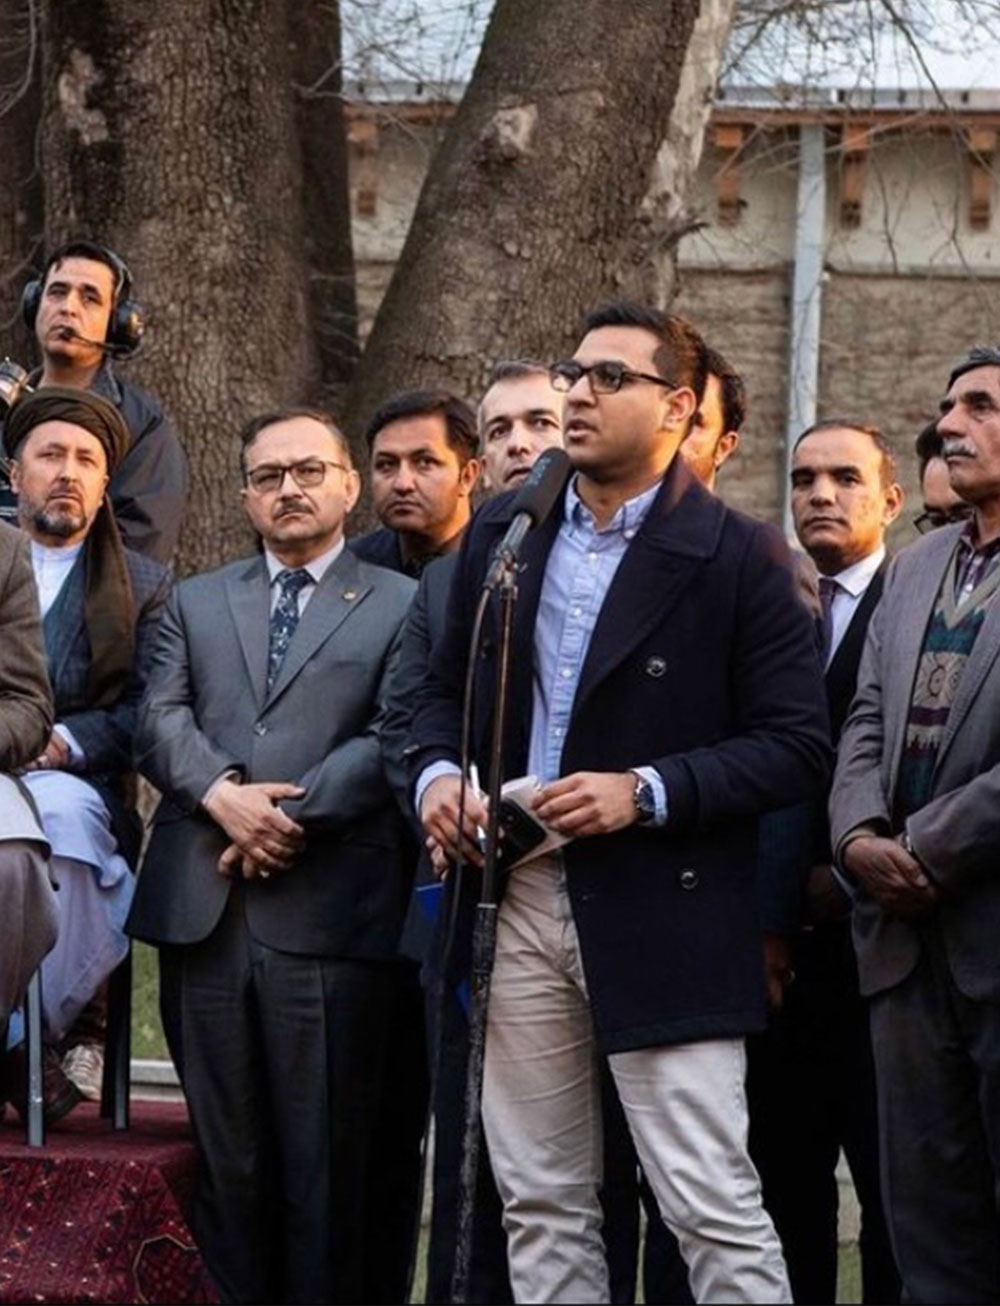 Idrees Ali stands in front of a microhpone at a press conference in Kabul, Afghanistan during the Taliban–U.S. peace deal signing. In the background are people in professional attire and other journalists.